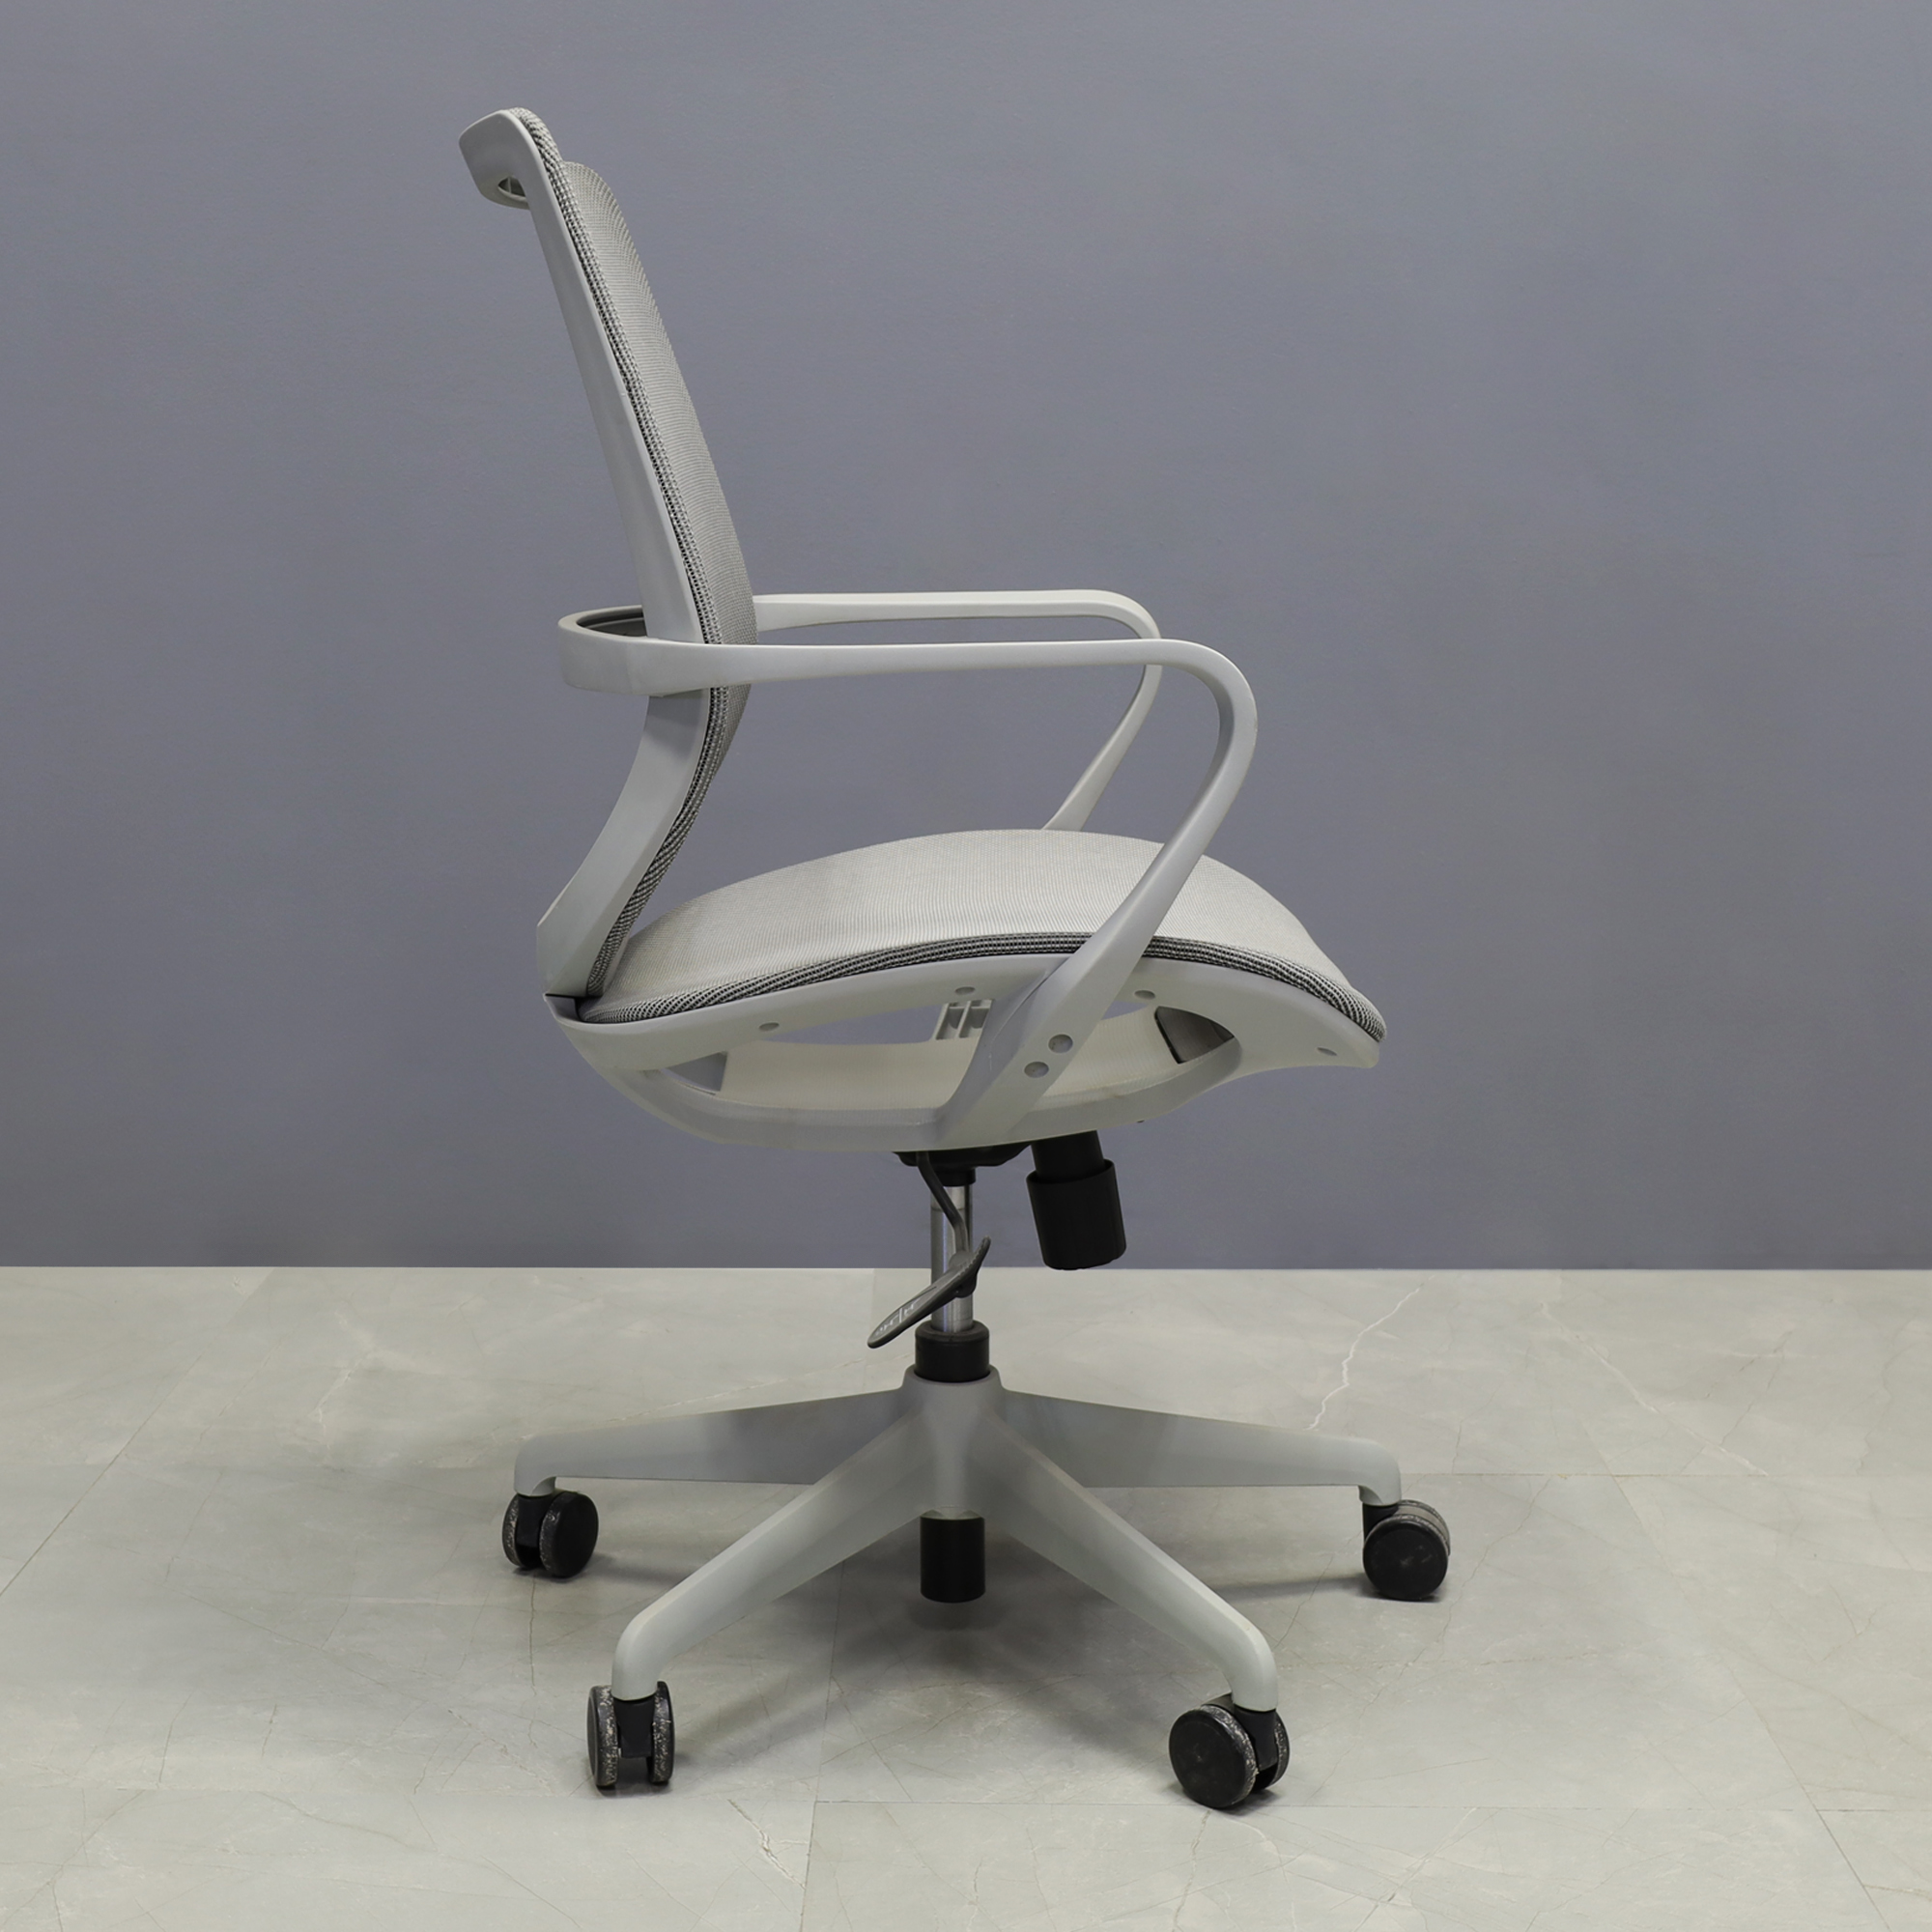 Megan Fabric High-Back Commercial Office Chair, shown here.